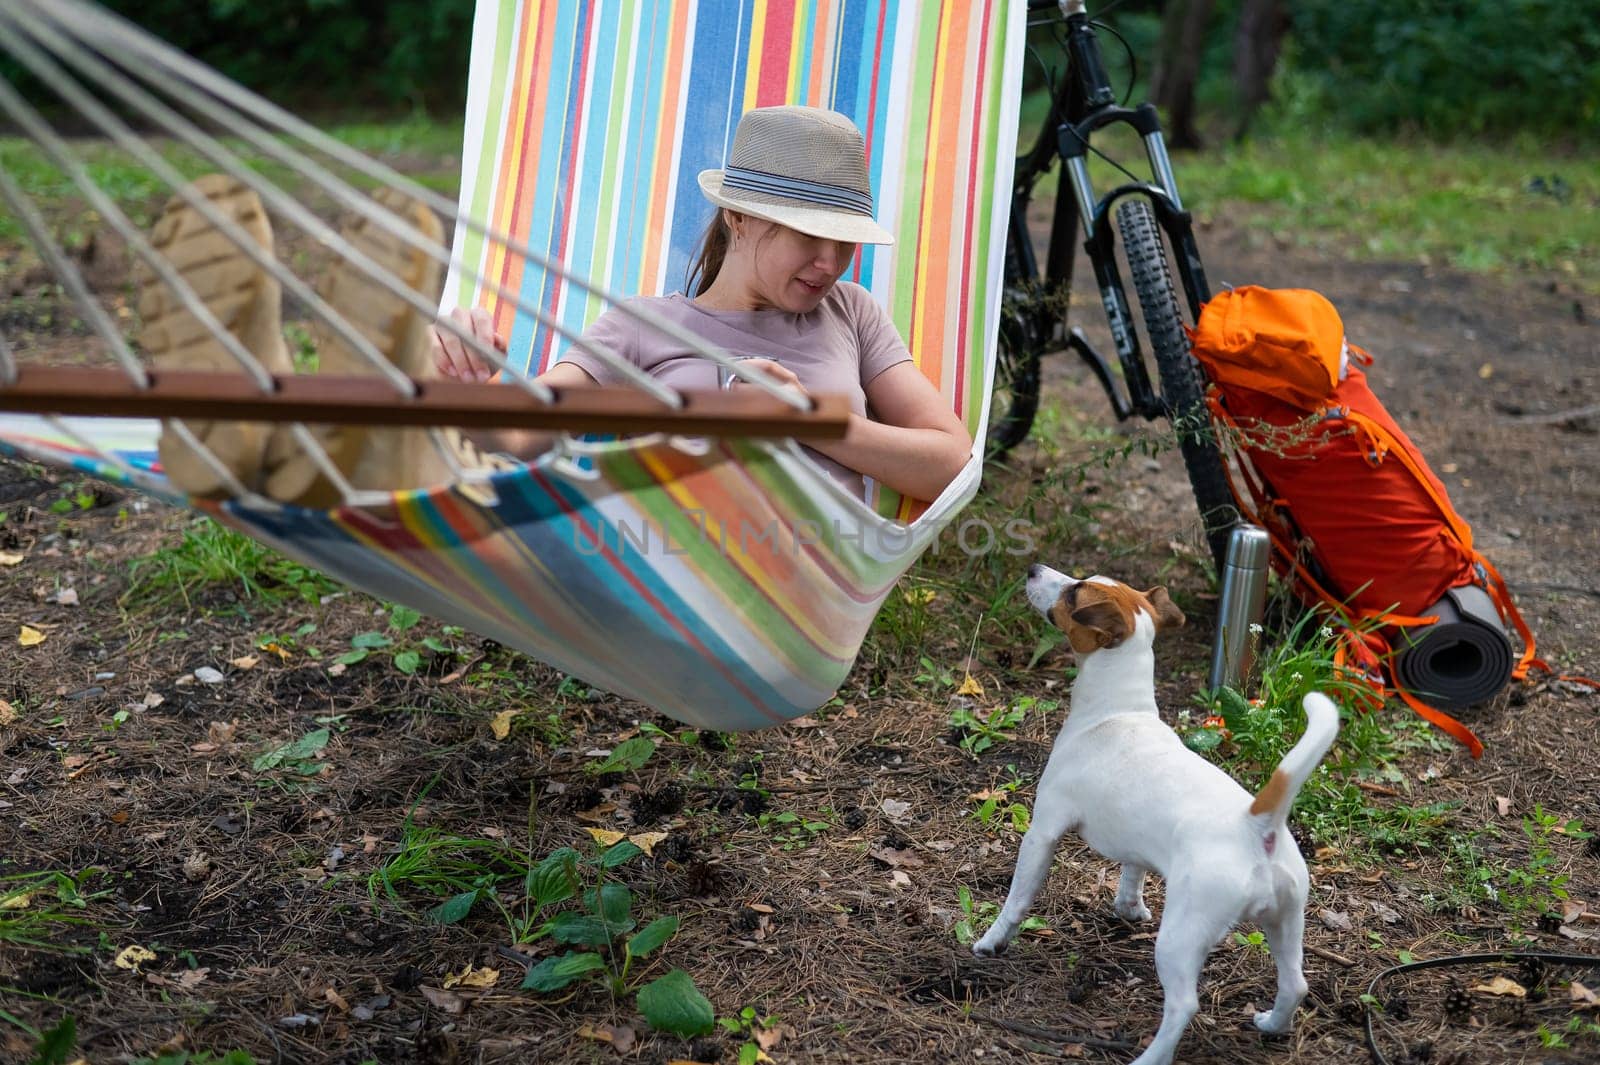 Caucasian woman lies in a hammock with Jack Russell Terrier dog in a pine forest.